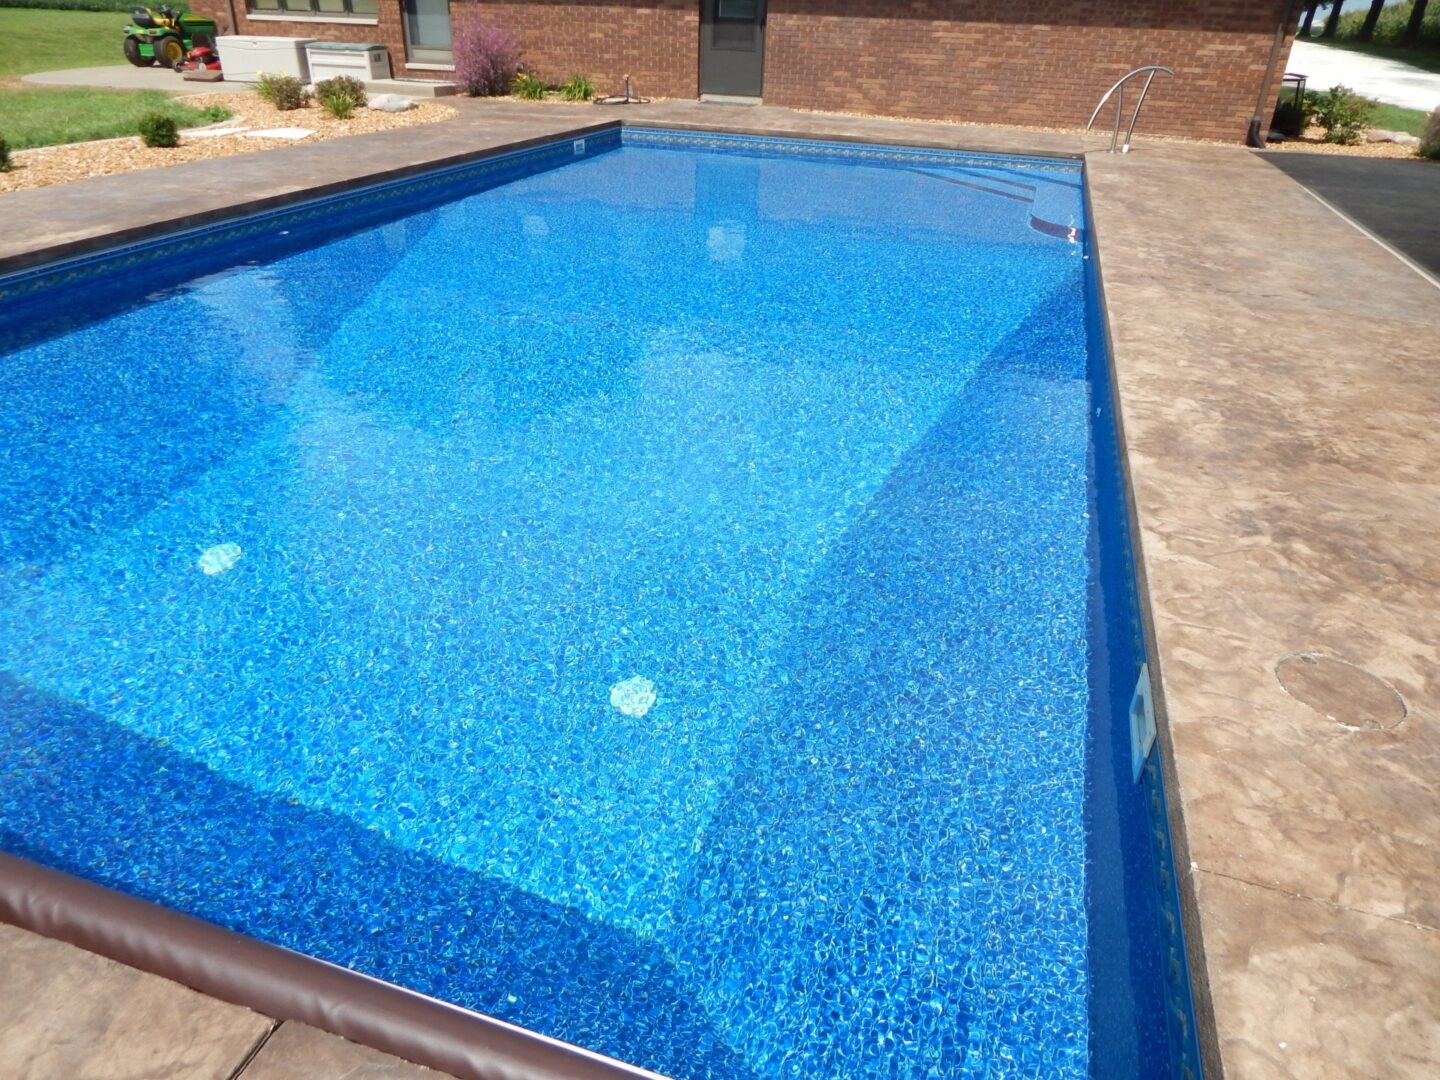 A project of Leisure Pool Supply